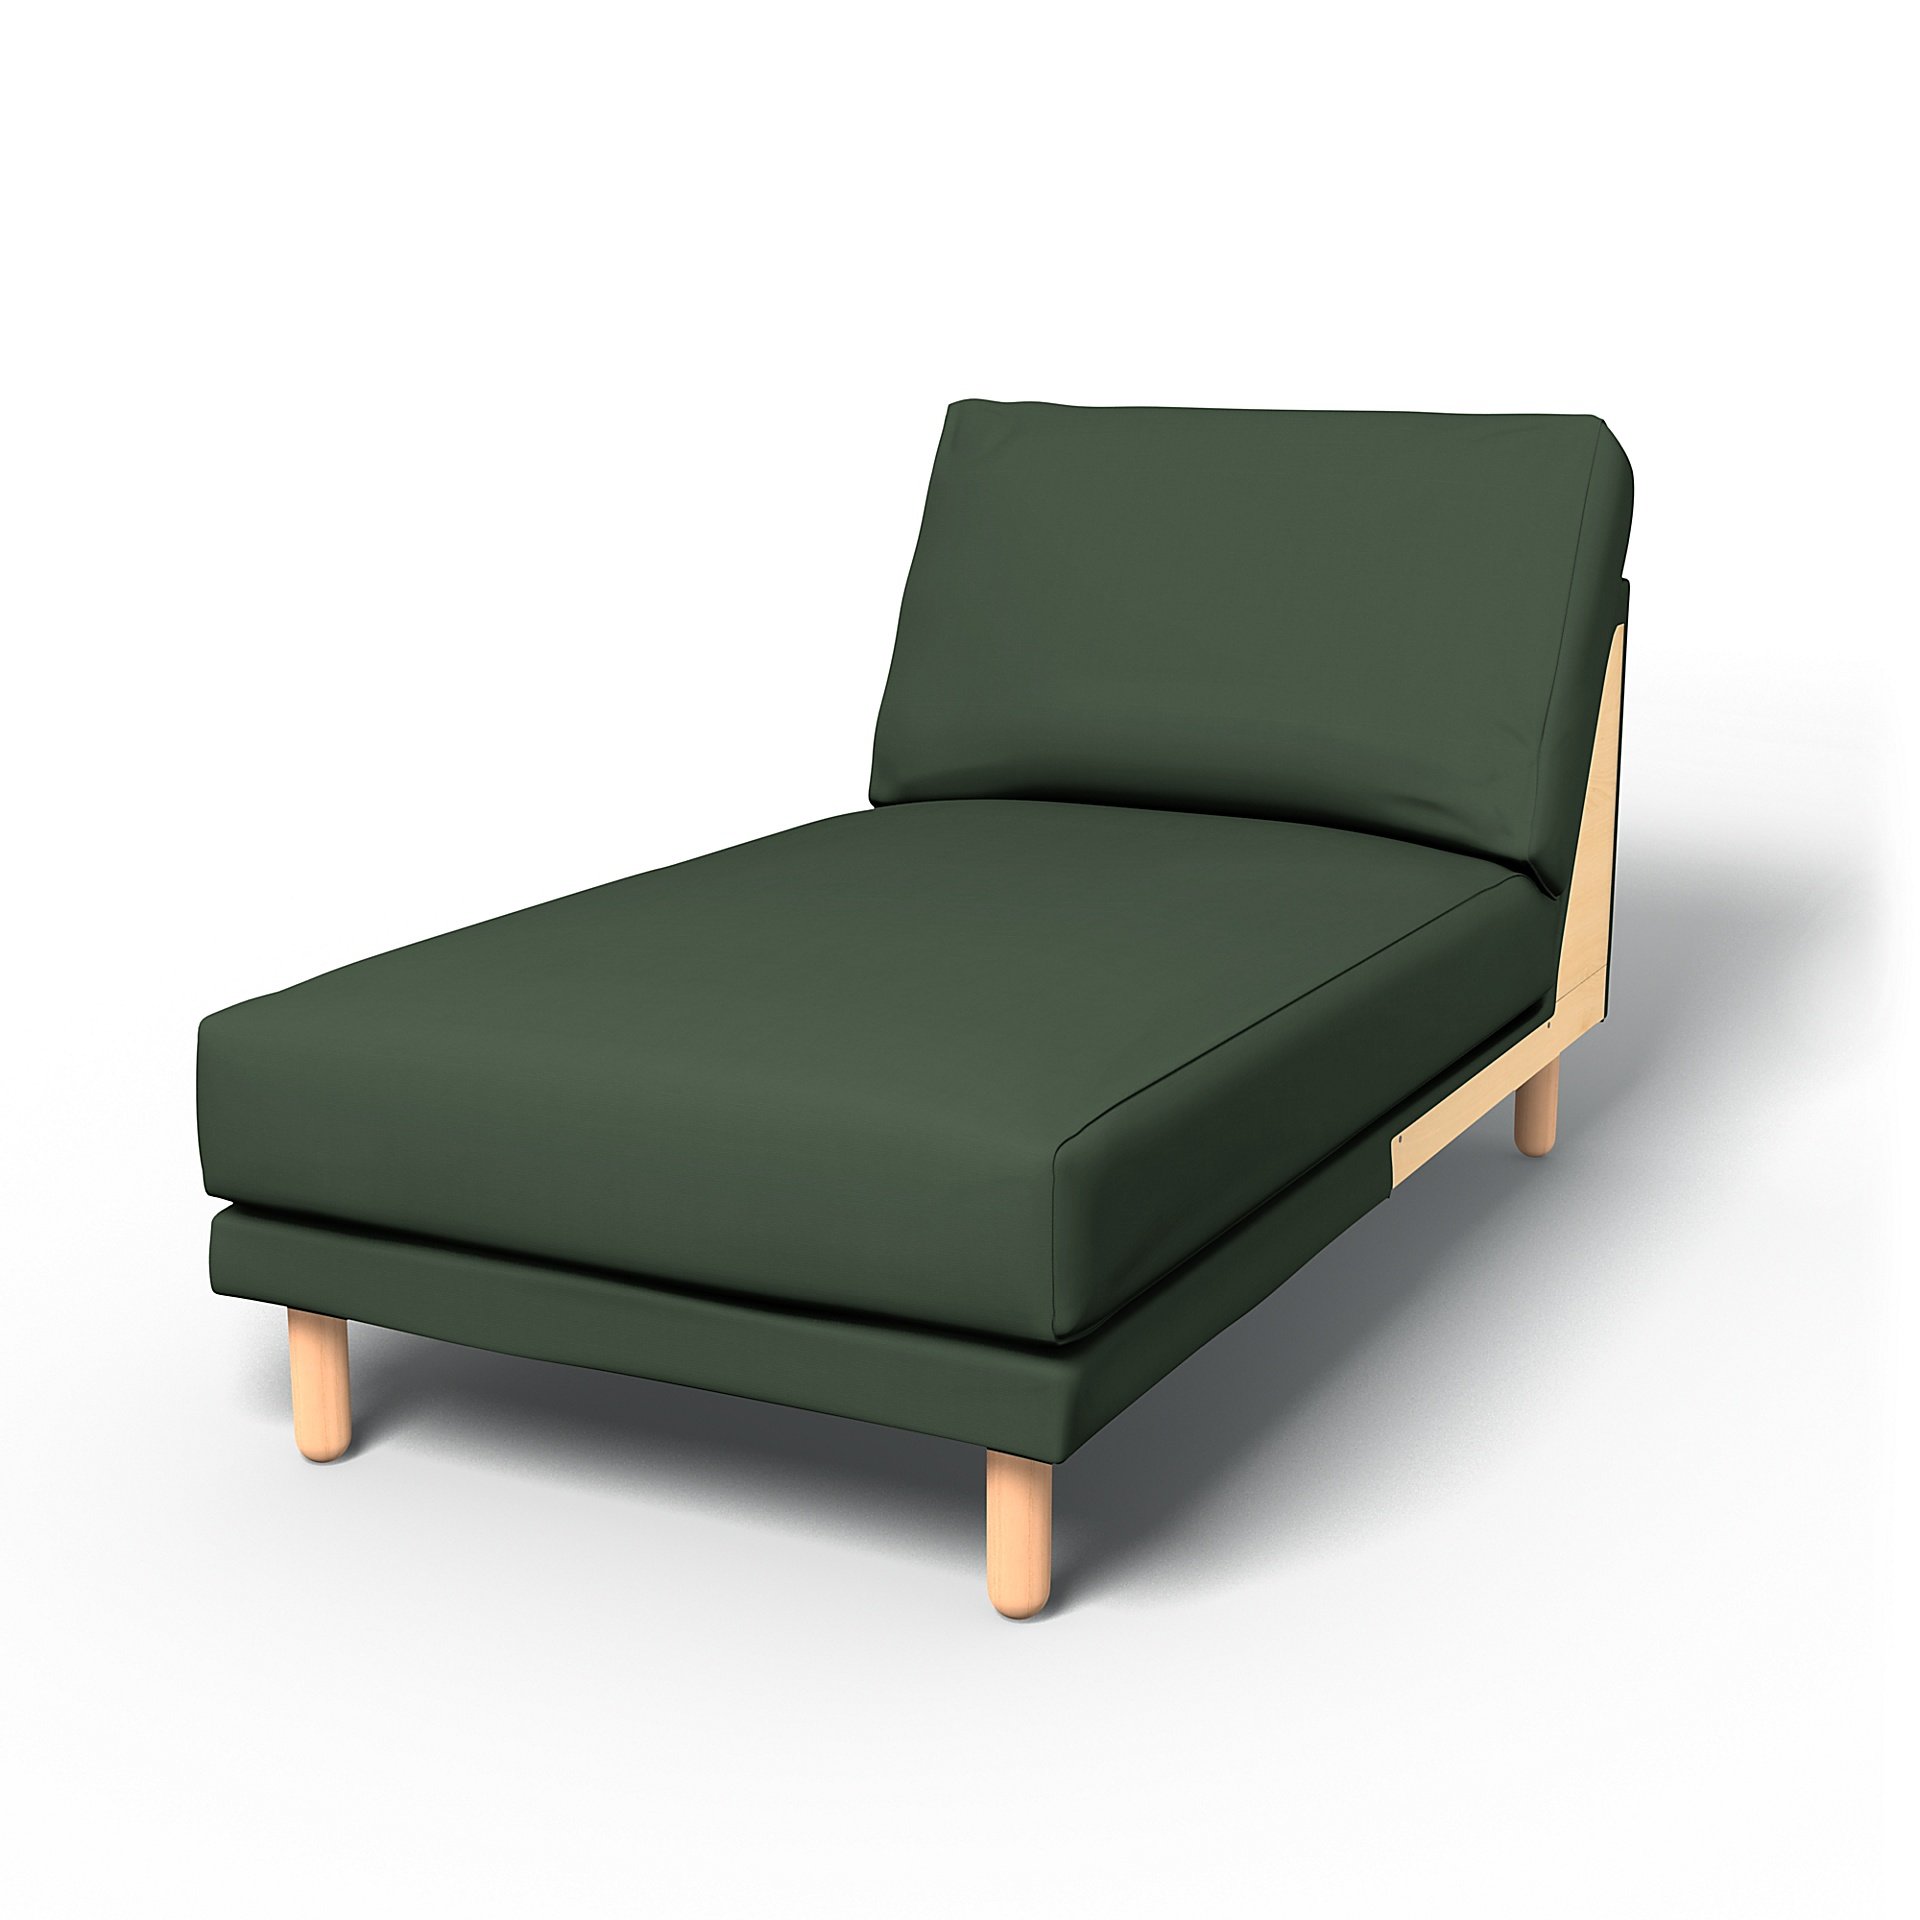 IKEA - Norsborg Chaise Longue Add-on Unit Cover, Thyme, Cotton - Bemz